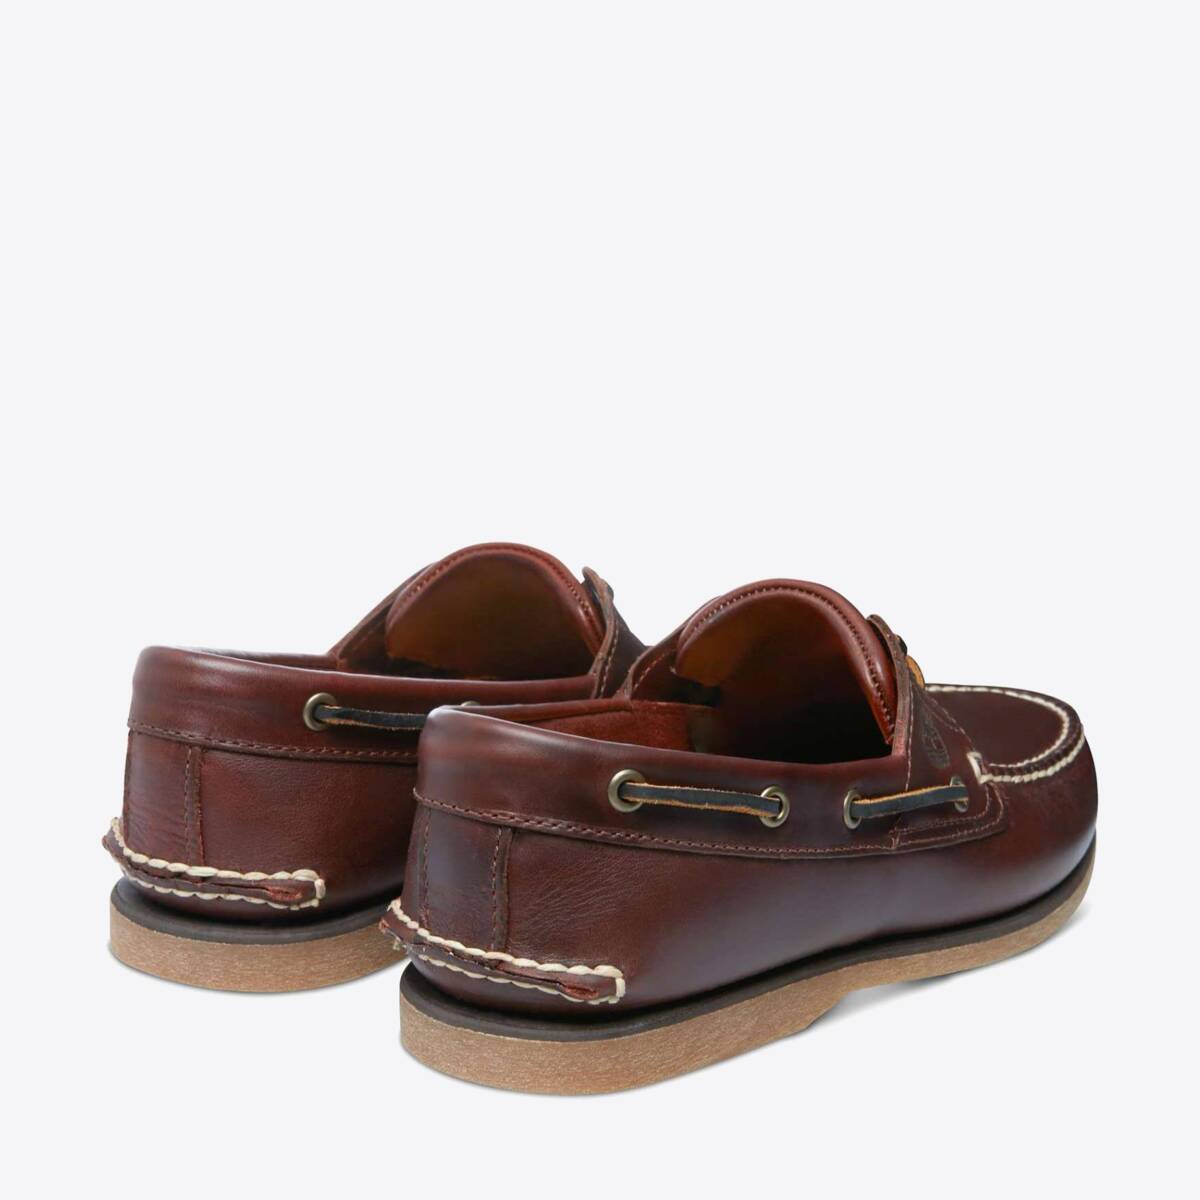 TIMBERLAND Classic 2-Eye Boat Shoes Rootbeer - Image 6